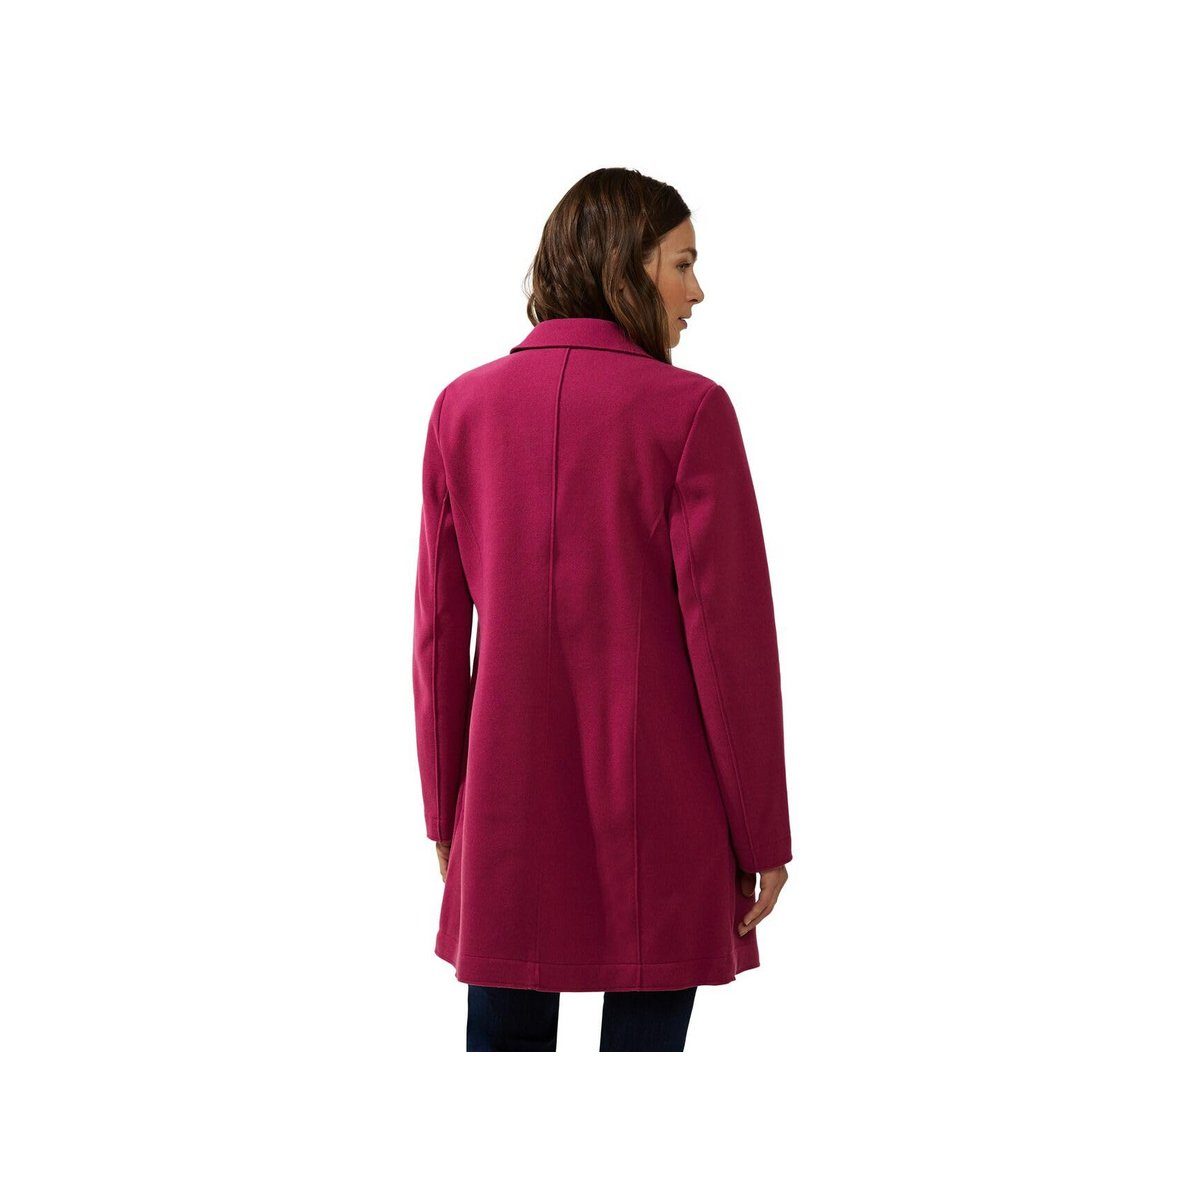 STREET ONE Outdoorjacke rot passform (1-St) peony textil red